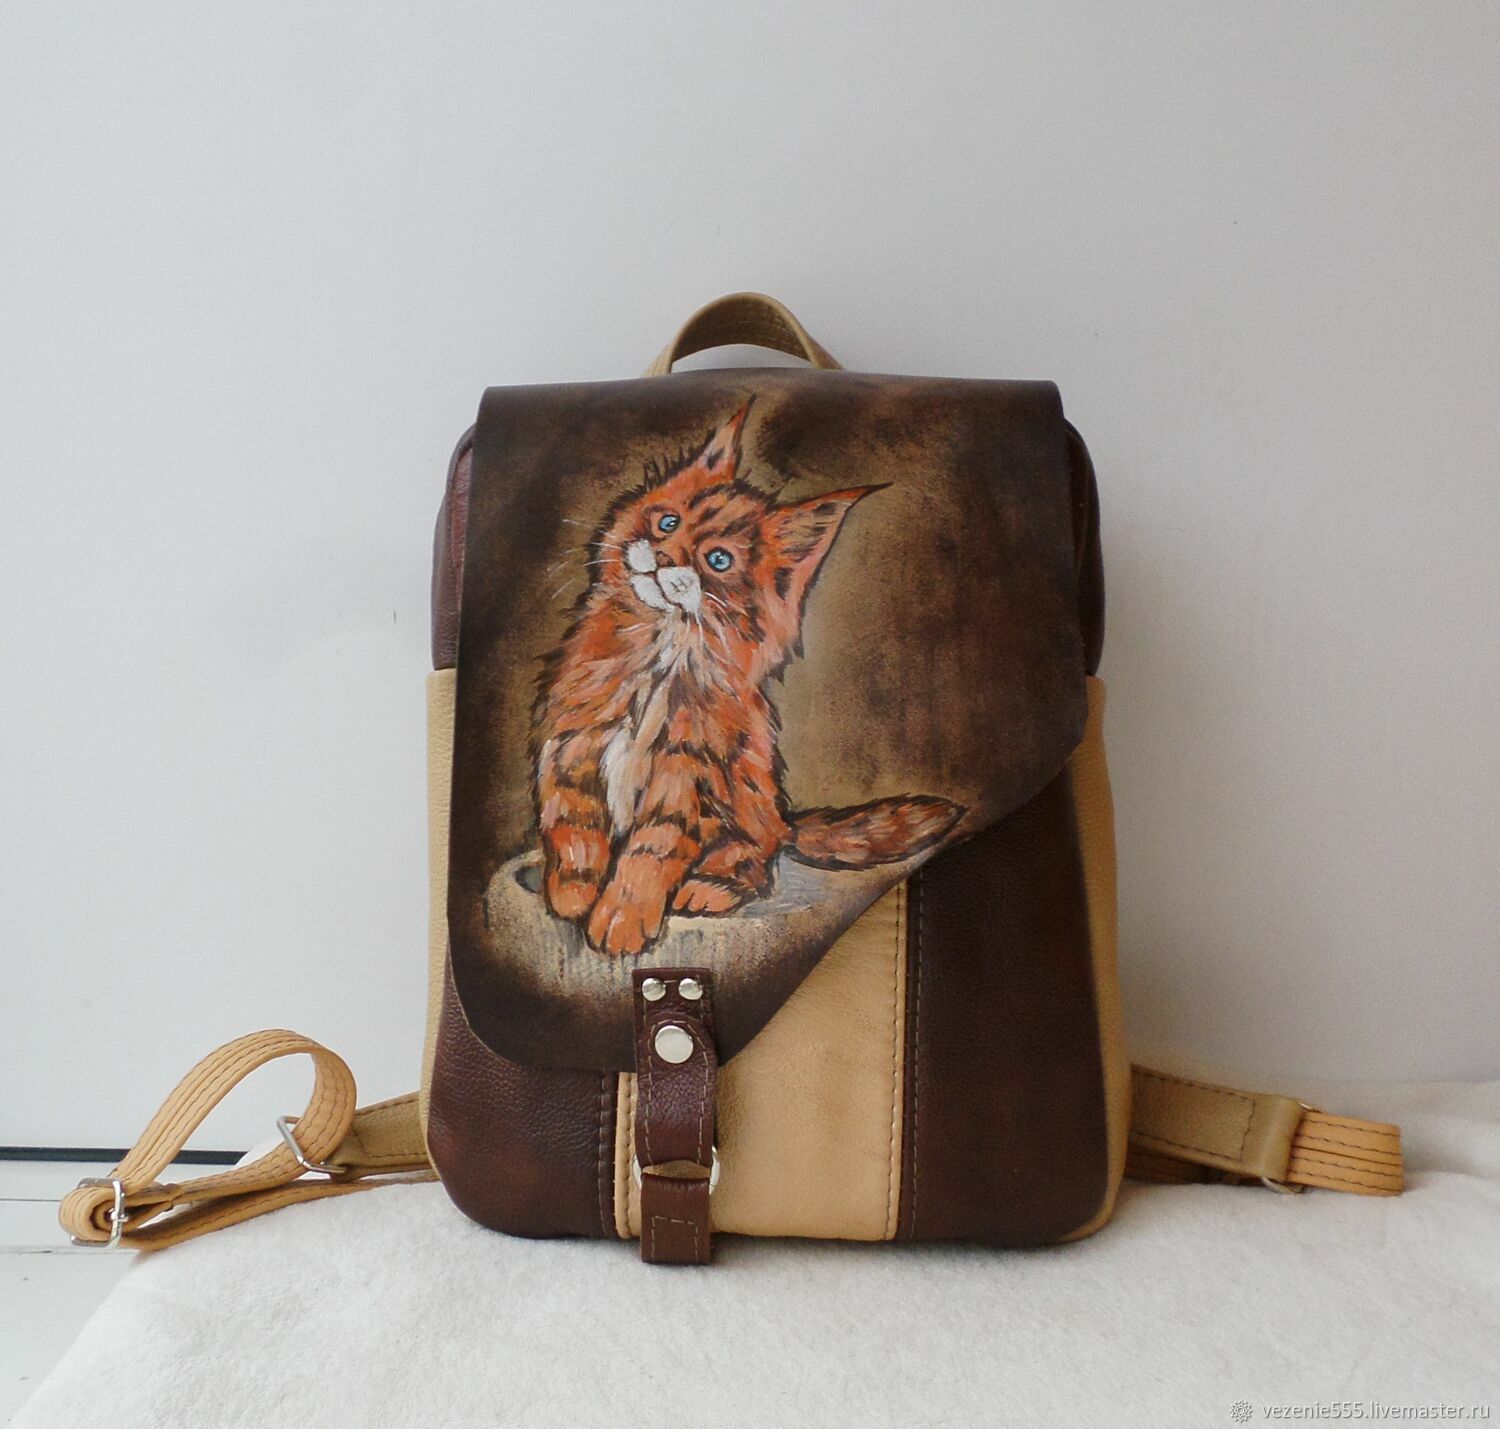 Leather backpack with engraving and painting Red kitten), Backpacks, Noginsk,  Фото №1